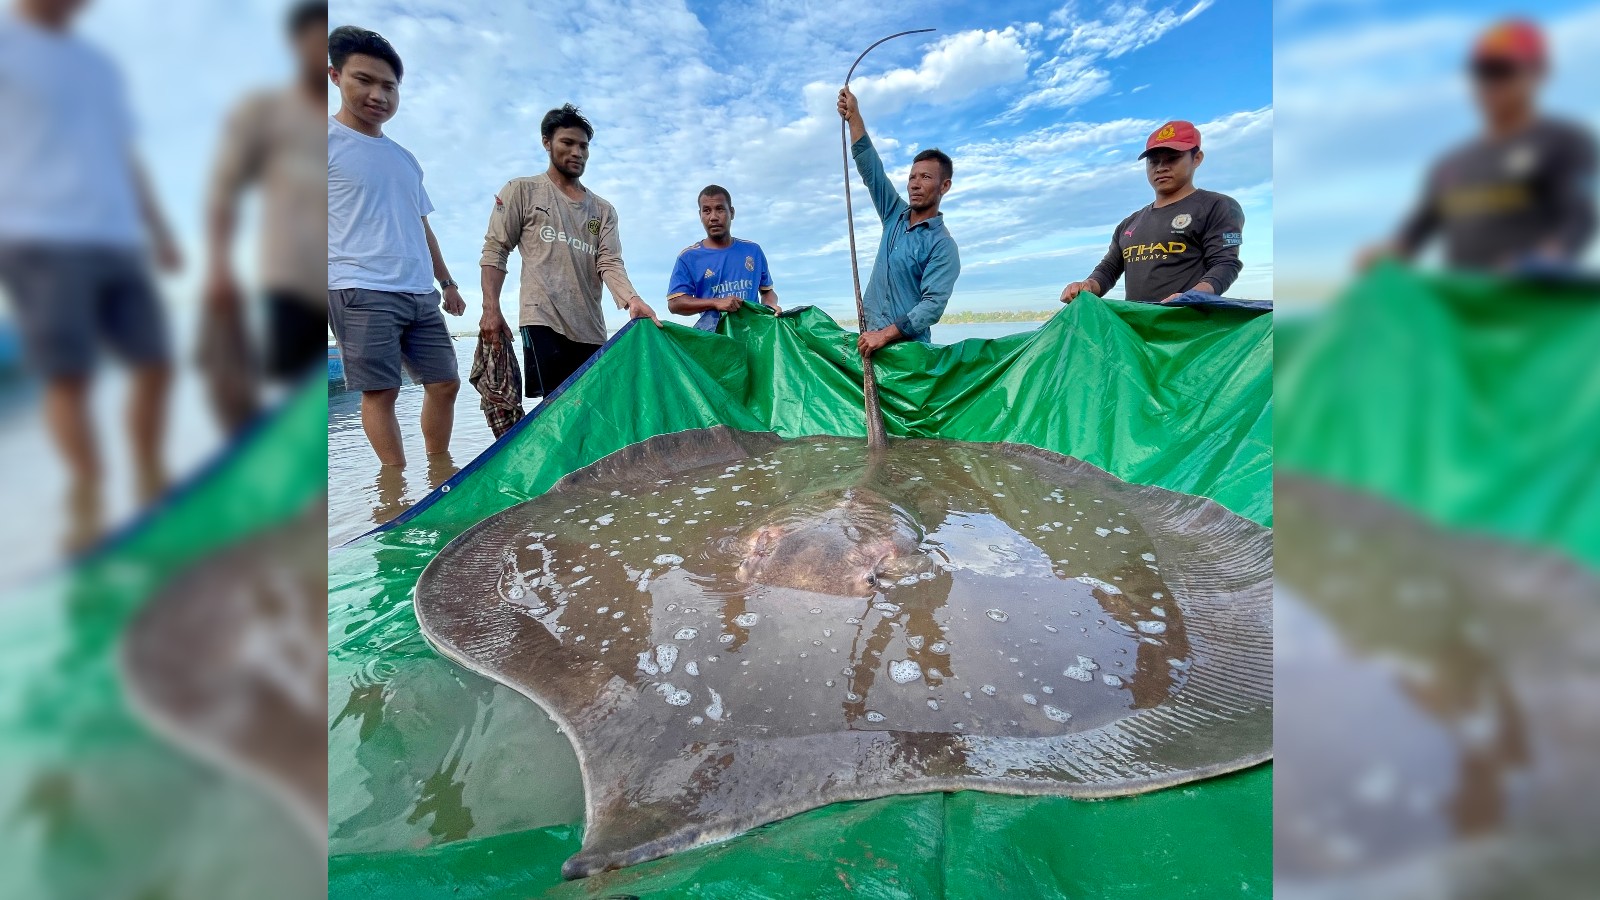 A 400-pound giant freshwater stingray in a net.